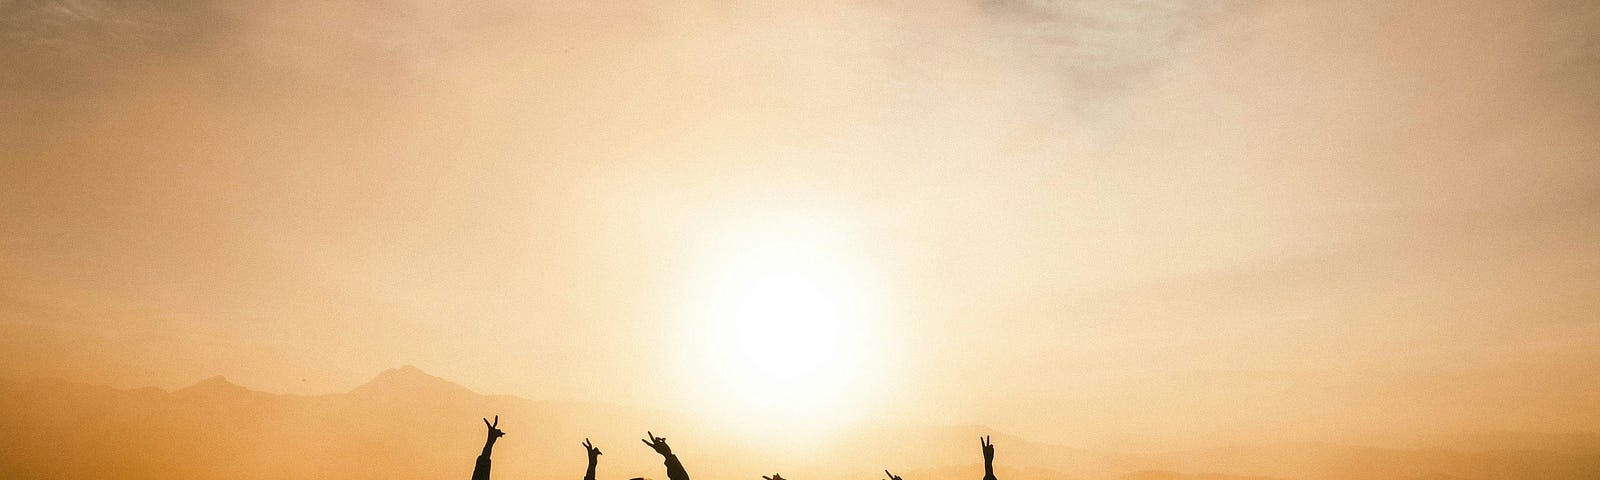 Six people stand on a hill silhouetted by the light of the rising sun.